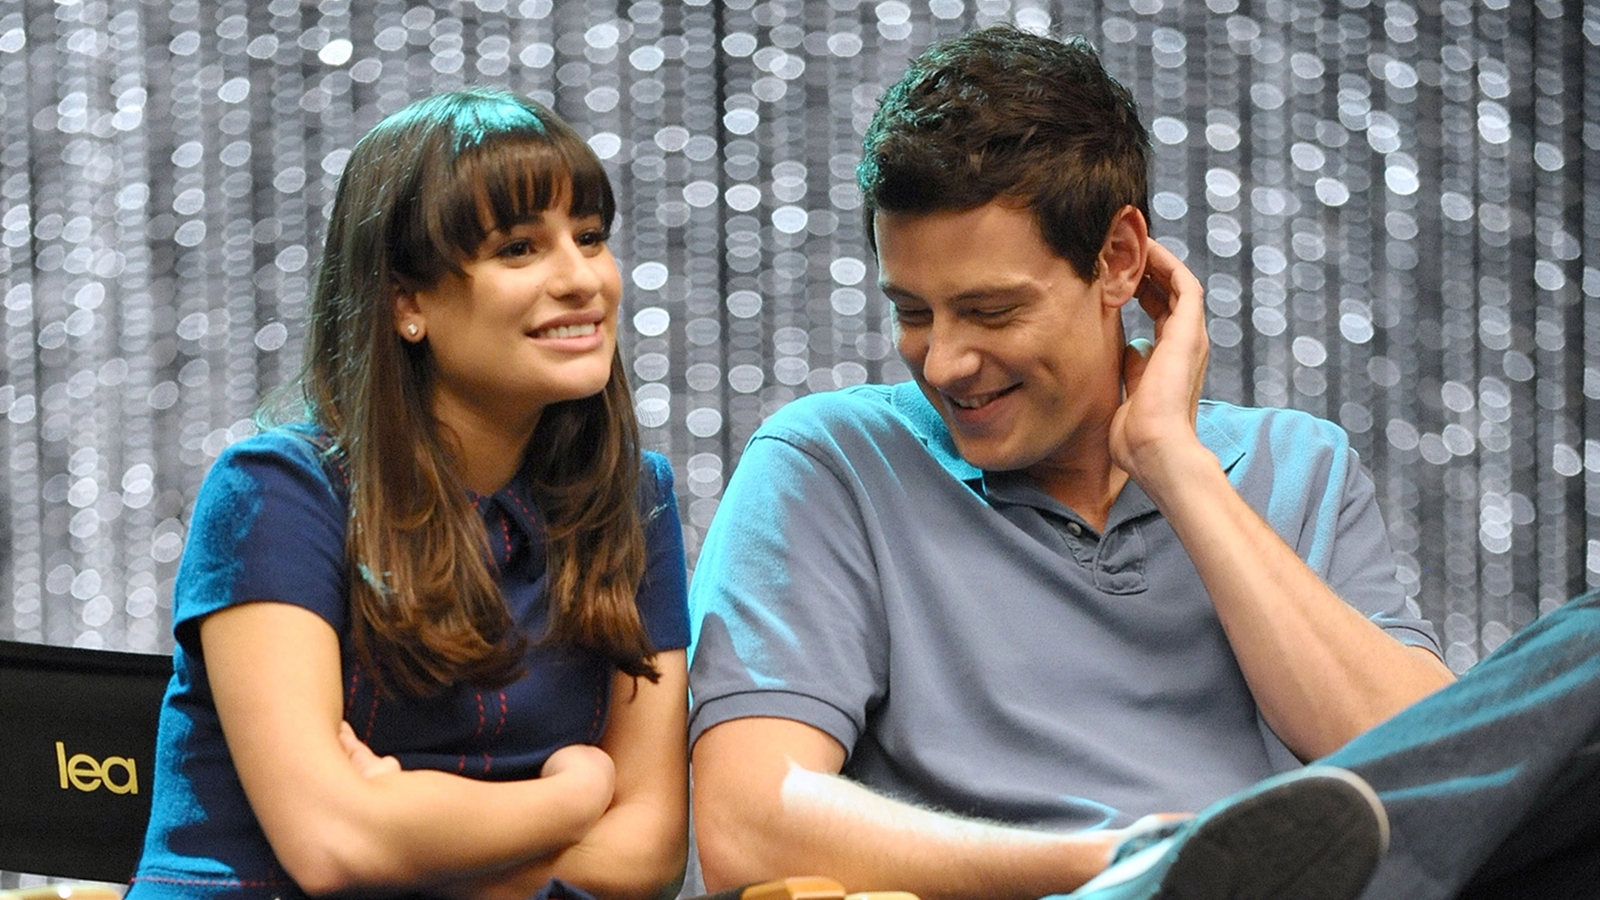 Cory Monteith, Lea Michele remembers him 10 years after his death: 'We will never forget your light'